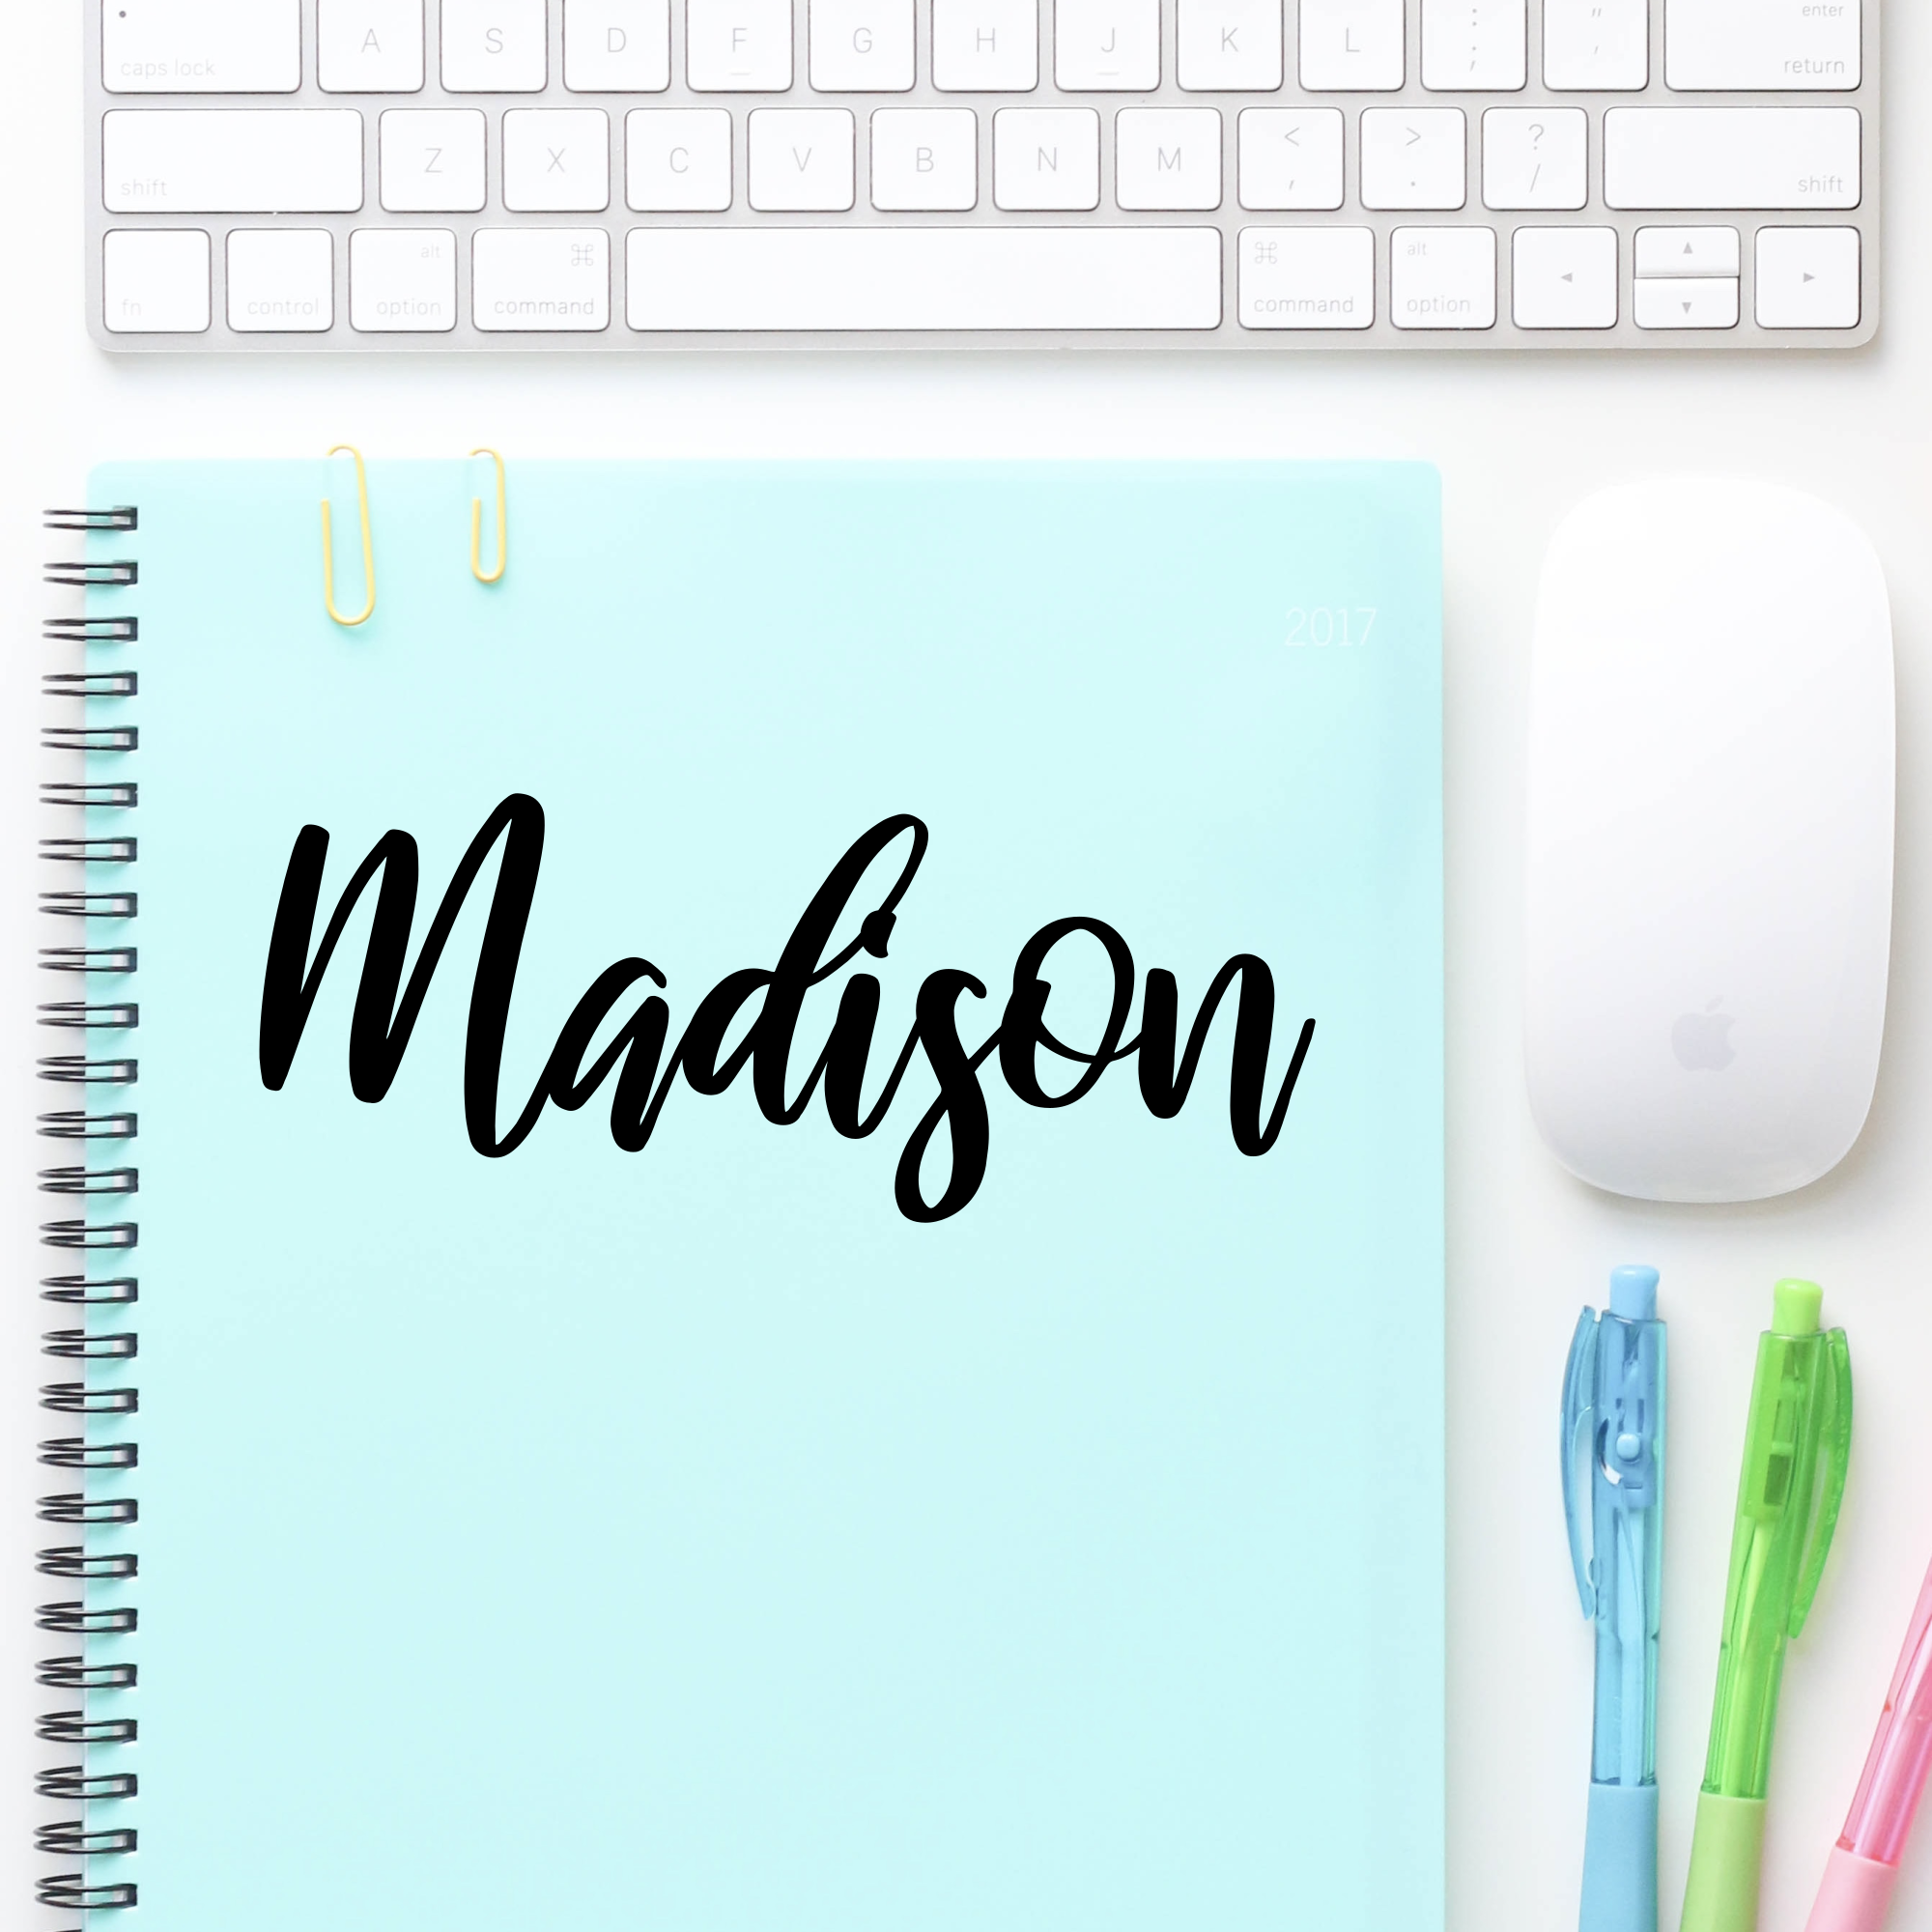 Custom Name Decal - Vinyl Name Sticker for Smooth, Hard Surfaces Like Tumblers, Laptops, and More!